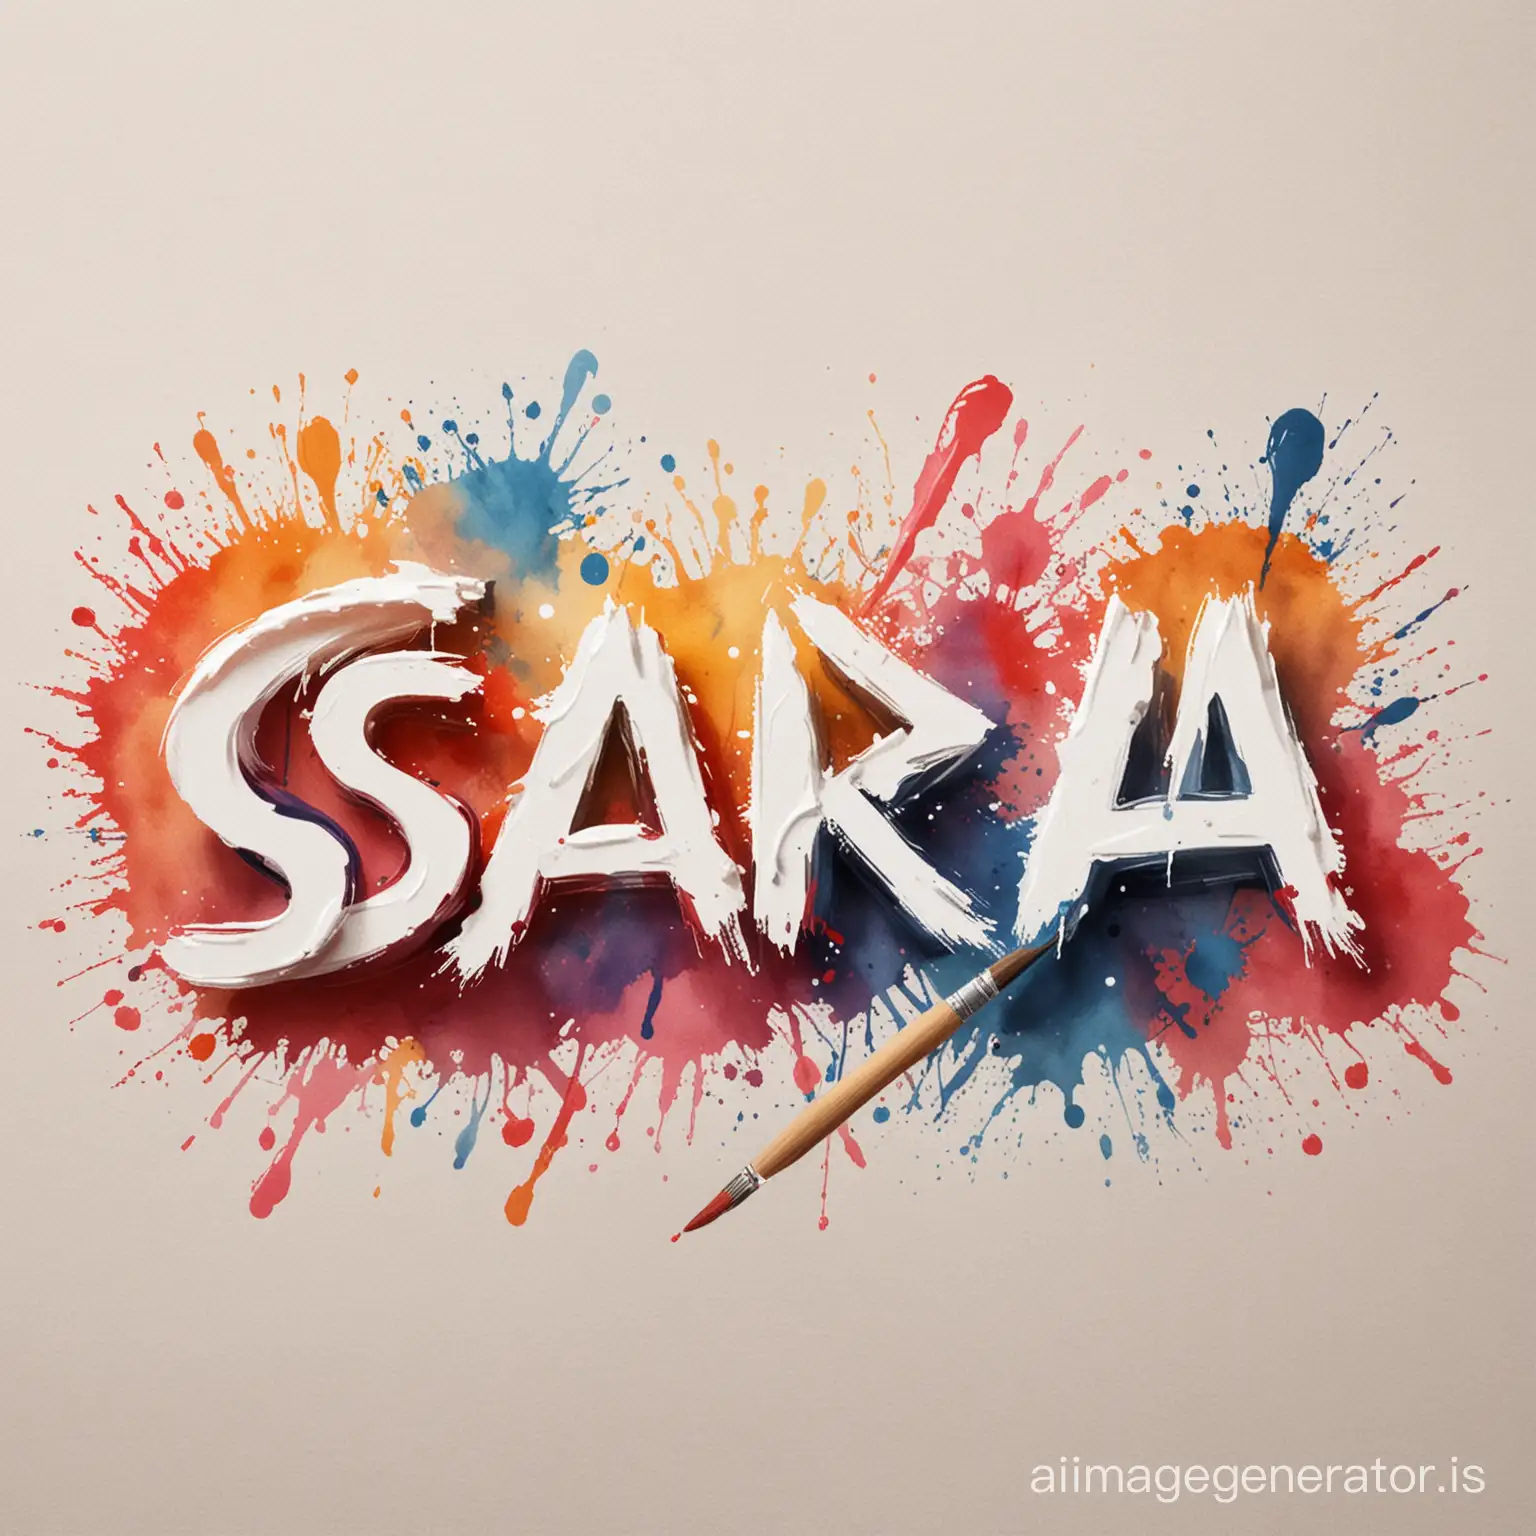 Creative-Painting-of-Sara-Logo-with-Brush-and-Color